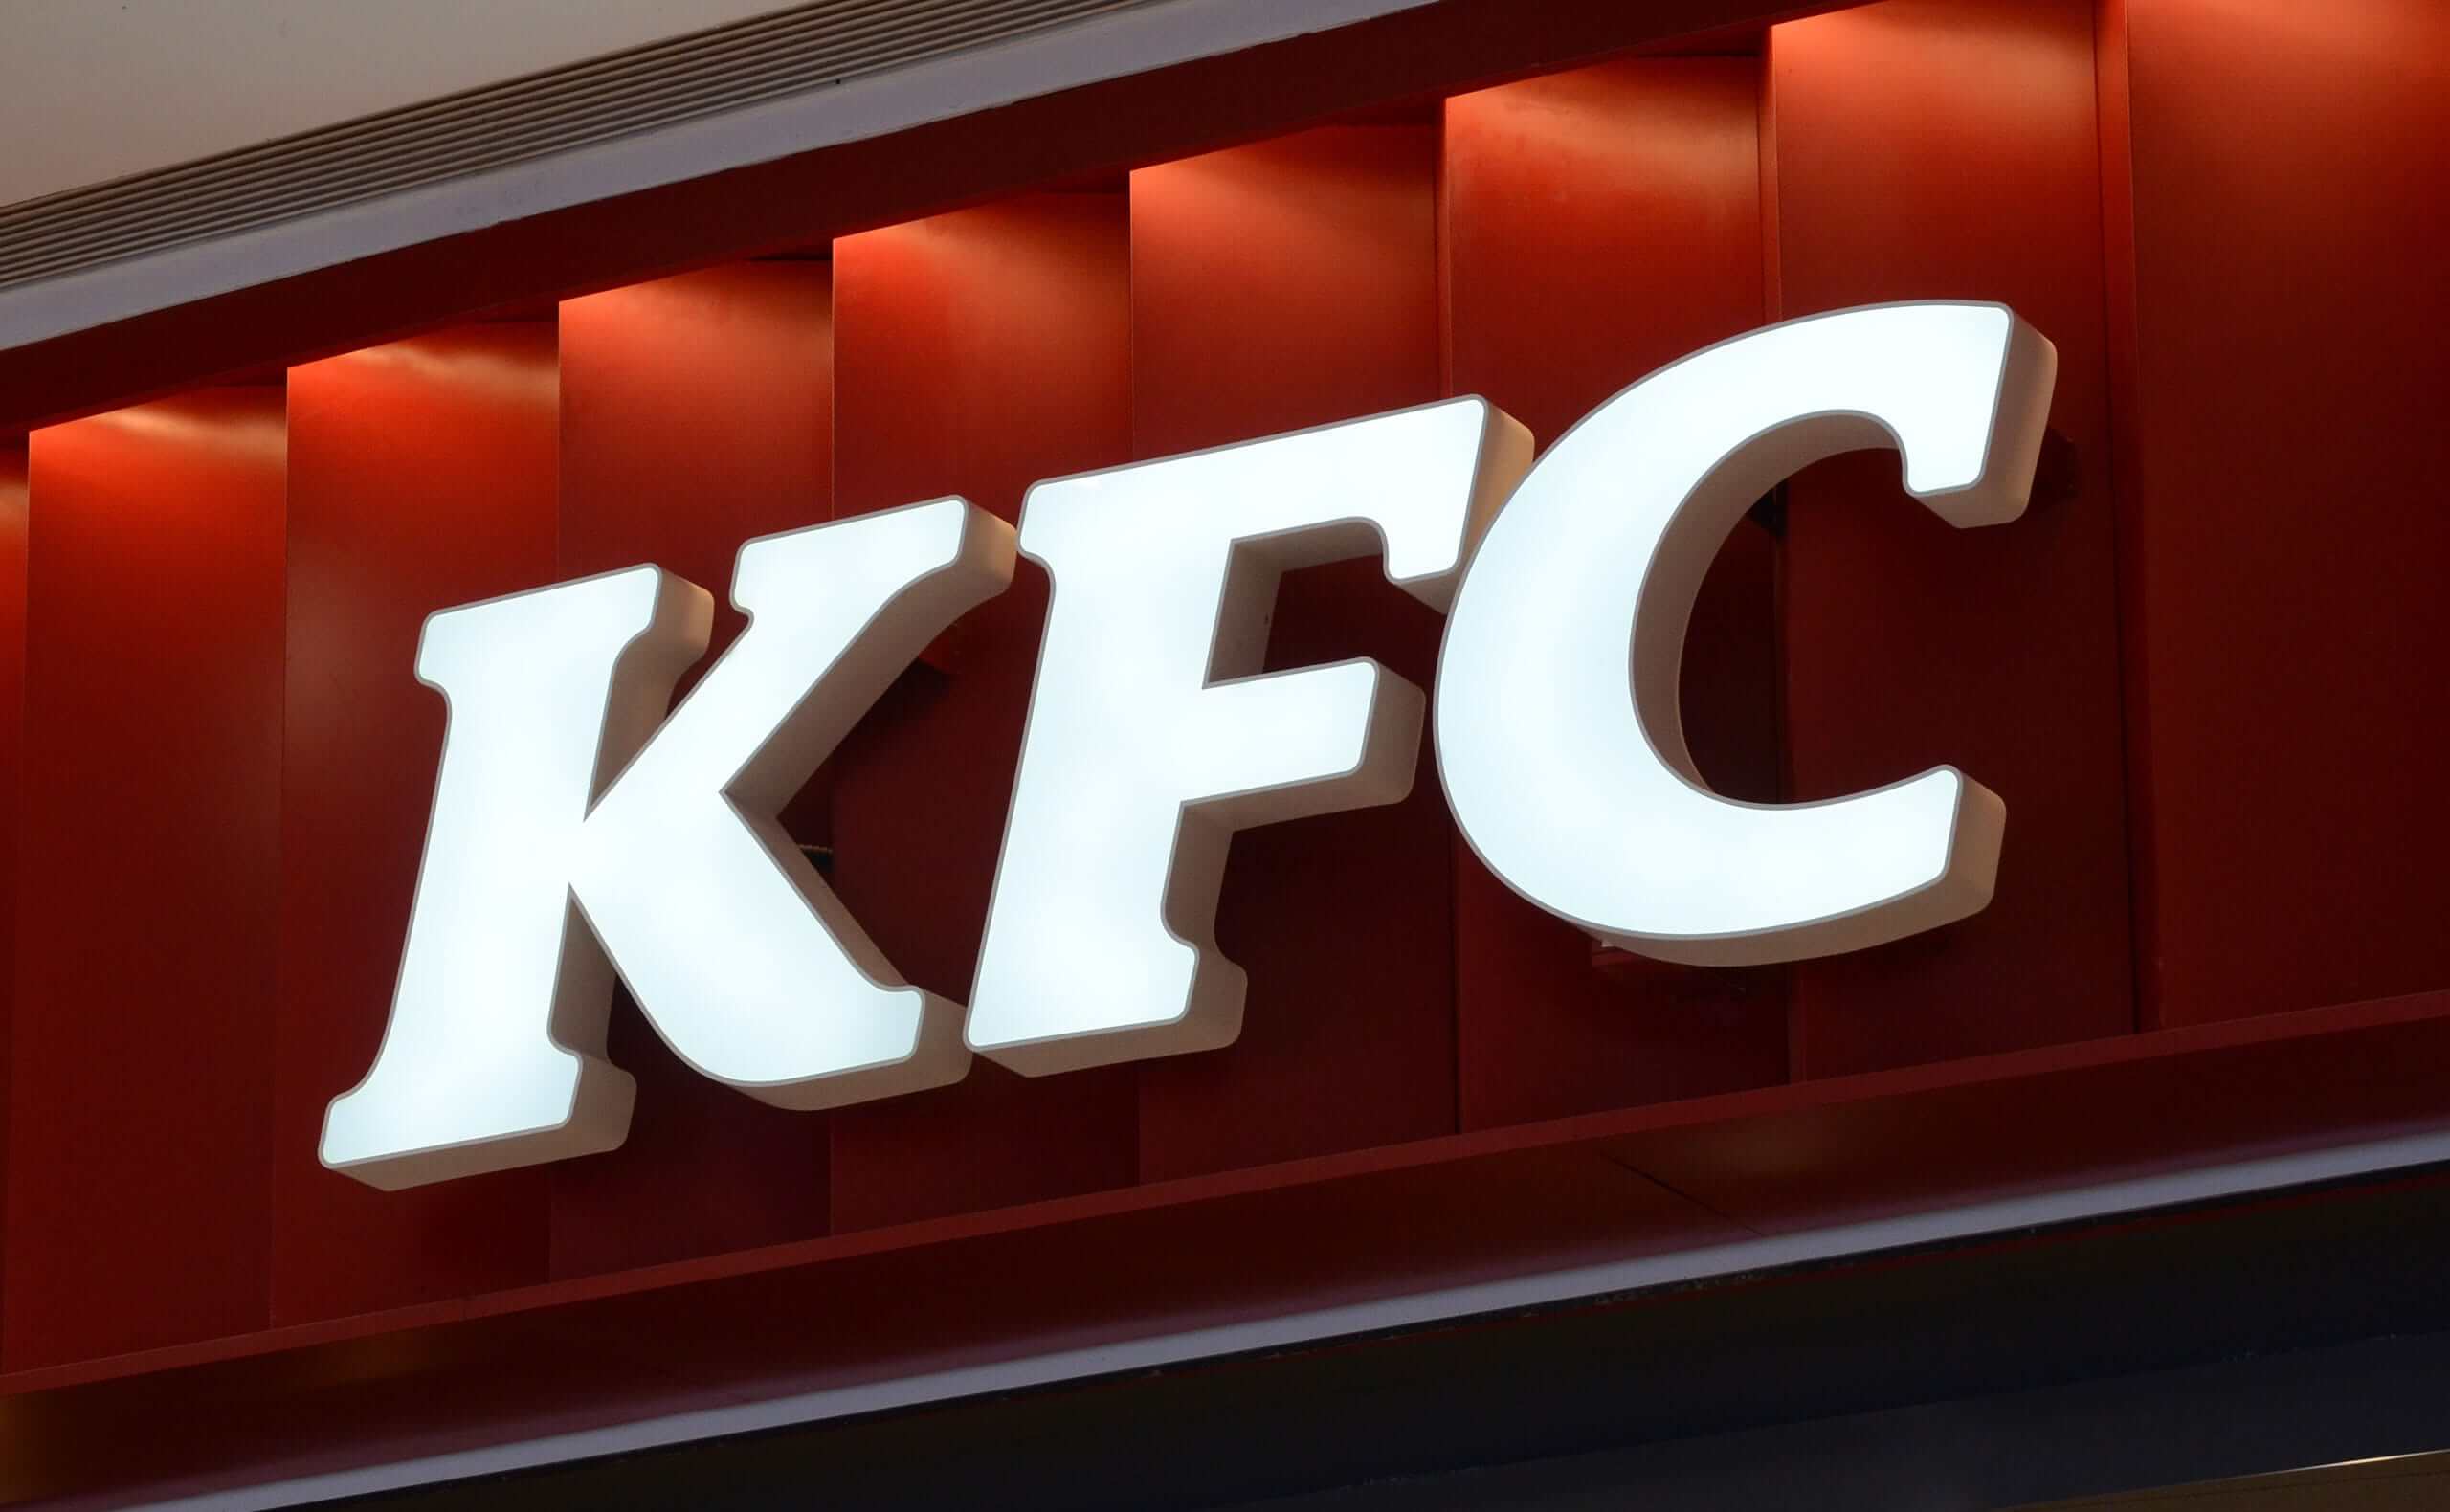 Metal Front Lit Channel Letters With Face Return For KFC